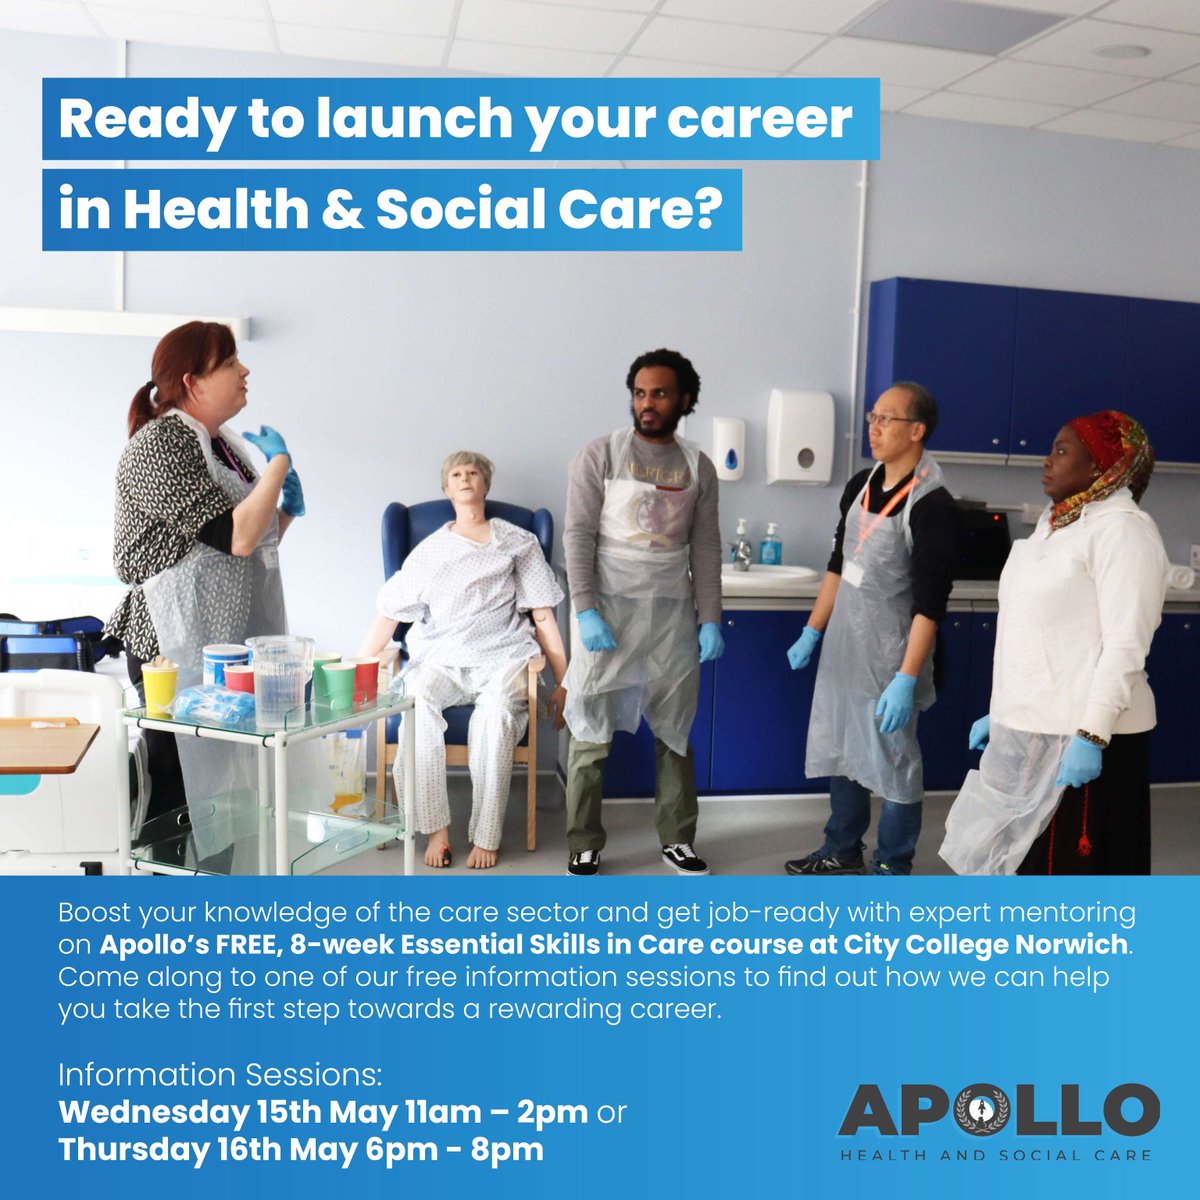 Get a head start in Health & Social Care! Join one of our FREE info sessions for our Essential Skills in Care course. Wed 15th May 11am–2pm or Thurs 16th May 6pm–8pm Boost your knowledge and get job-ready with expert mentoring. Reserve your spot now: ccn.ac.uk/adults/apollo/